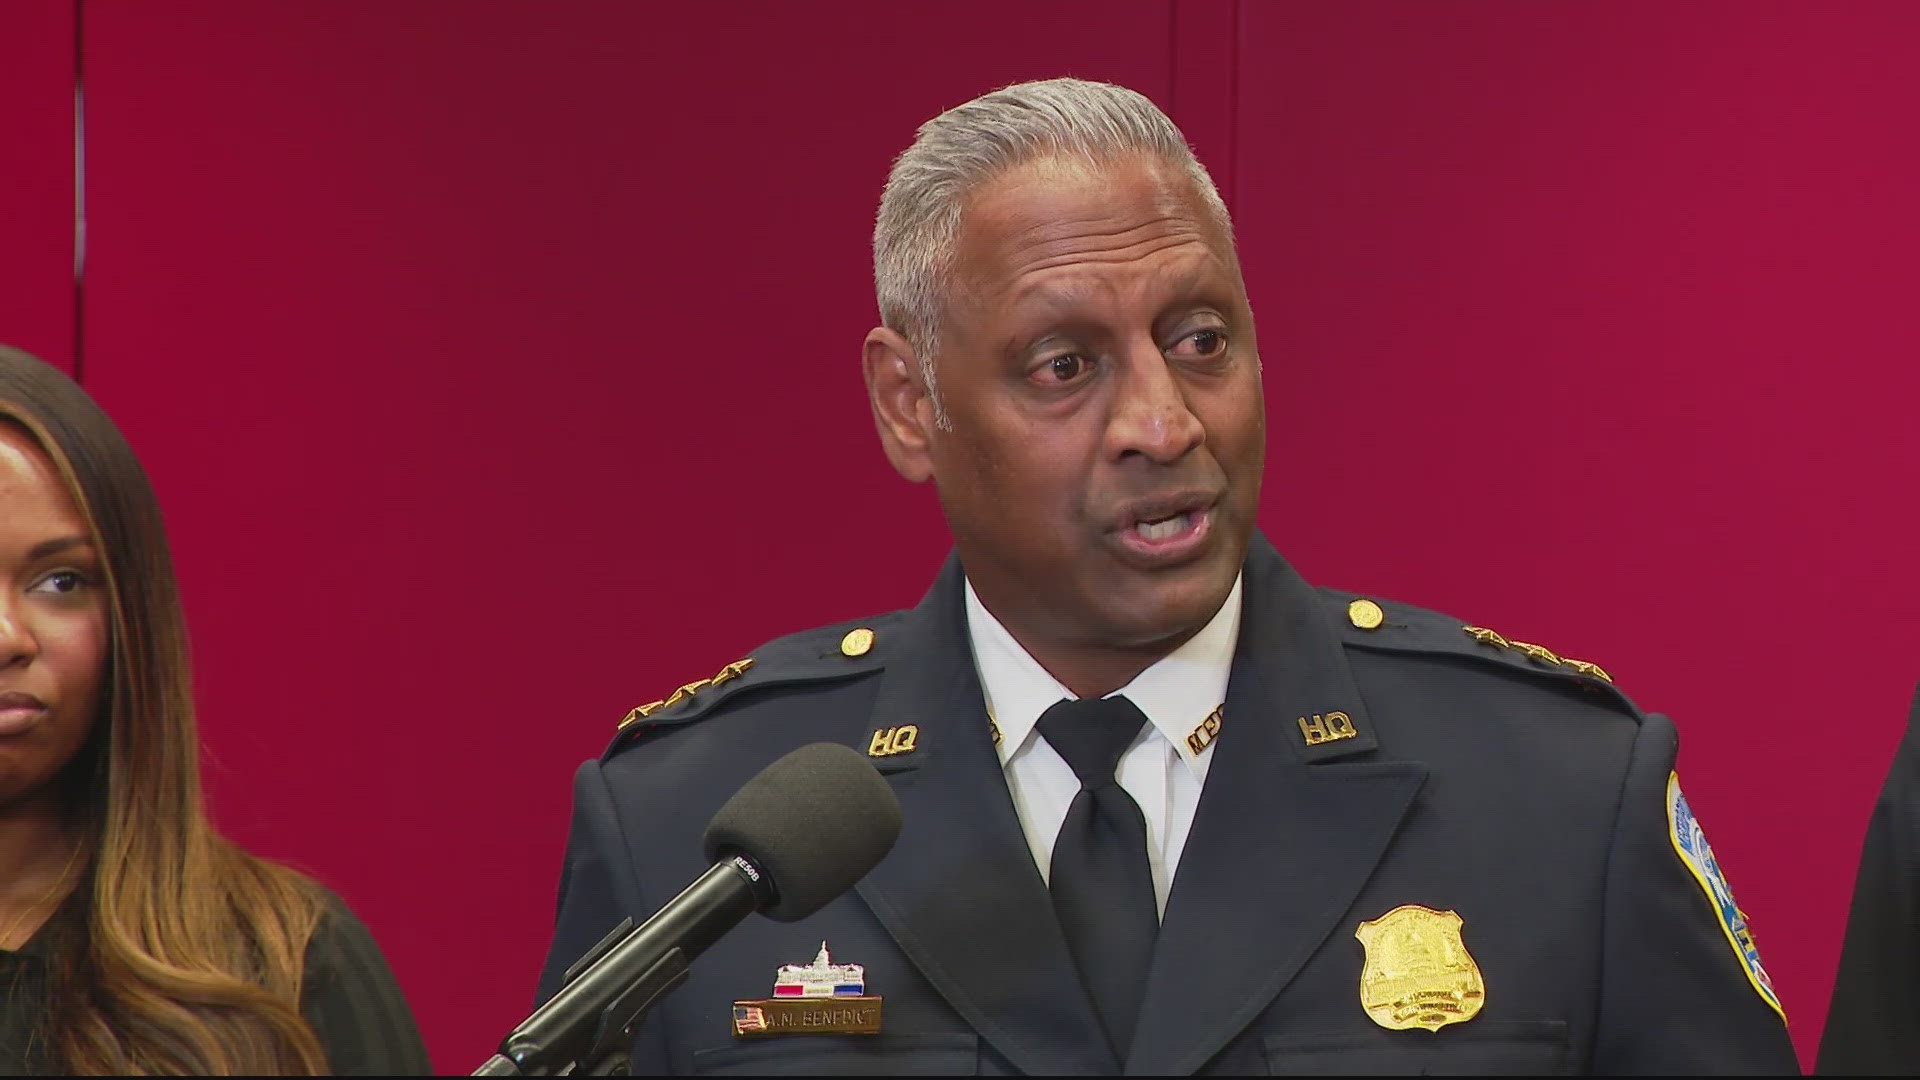 Bowser named Ashan Benedict as interim police chief Friday while a nationwide search is held for a permanent replacement.